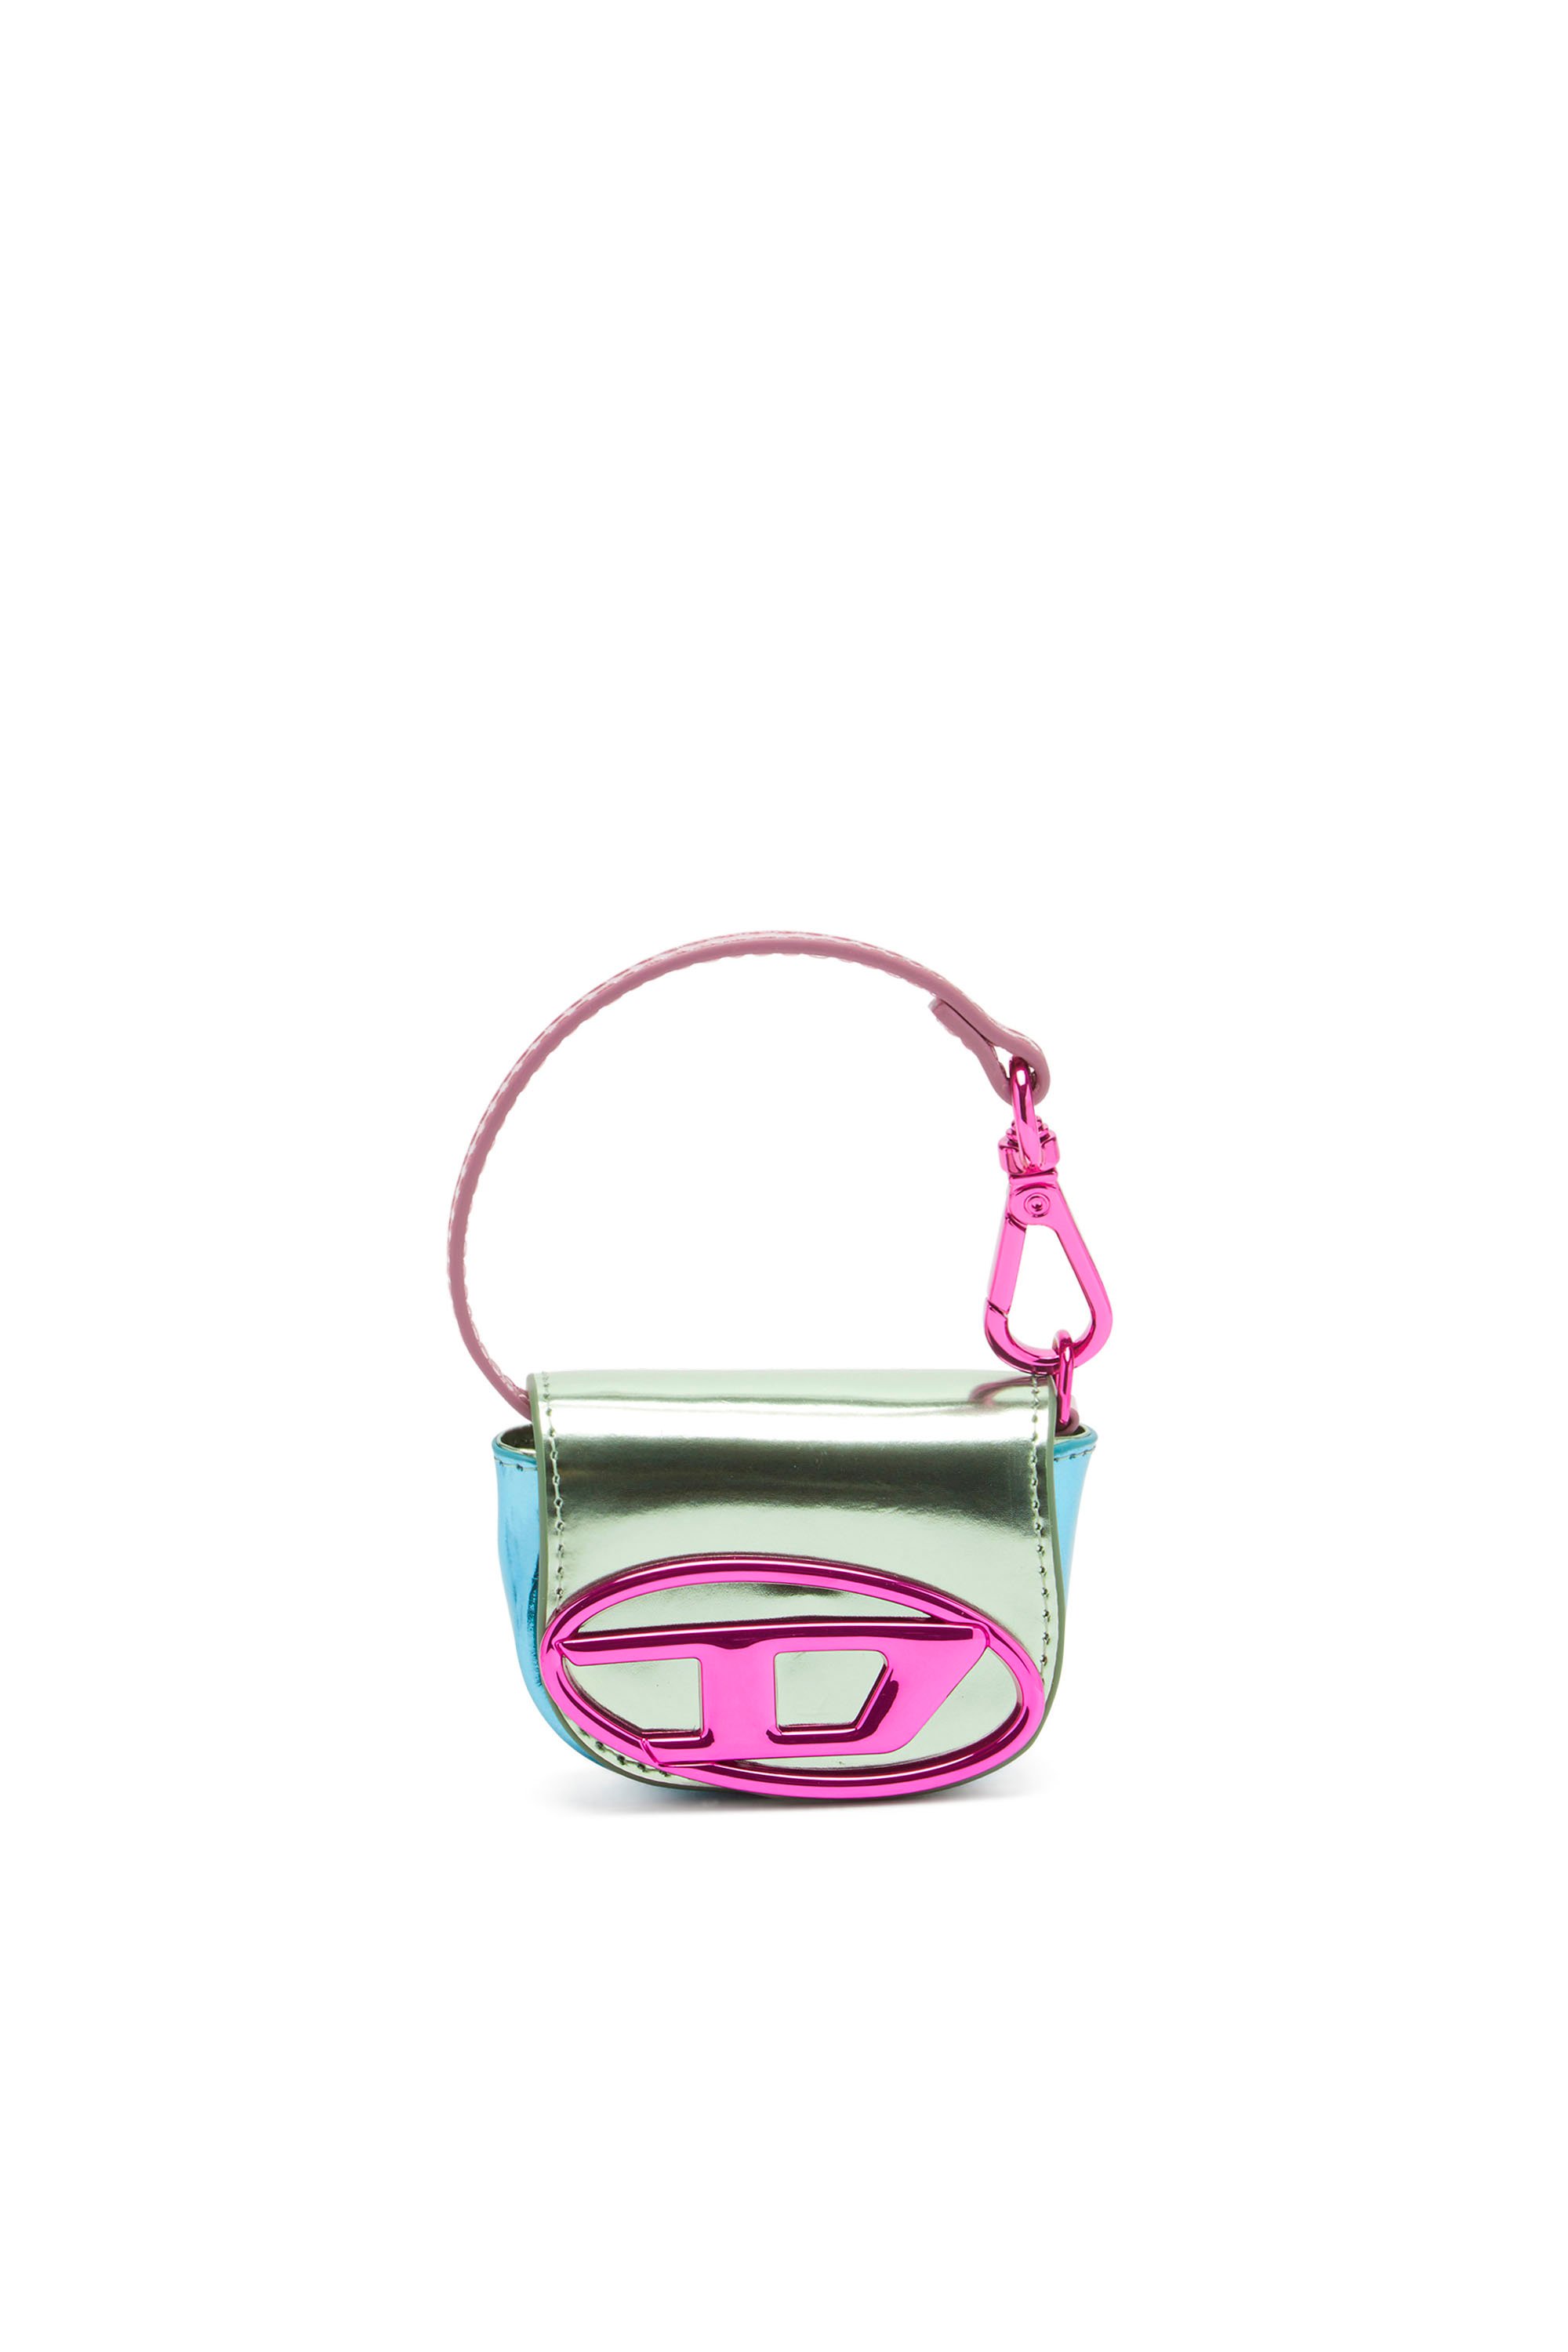 Diesel - 1DR XXS, Woman Iconic bag charm in mirror leather in Green - Image 2